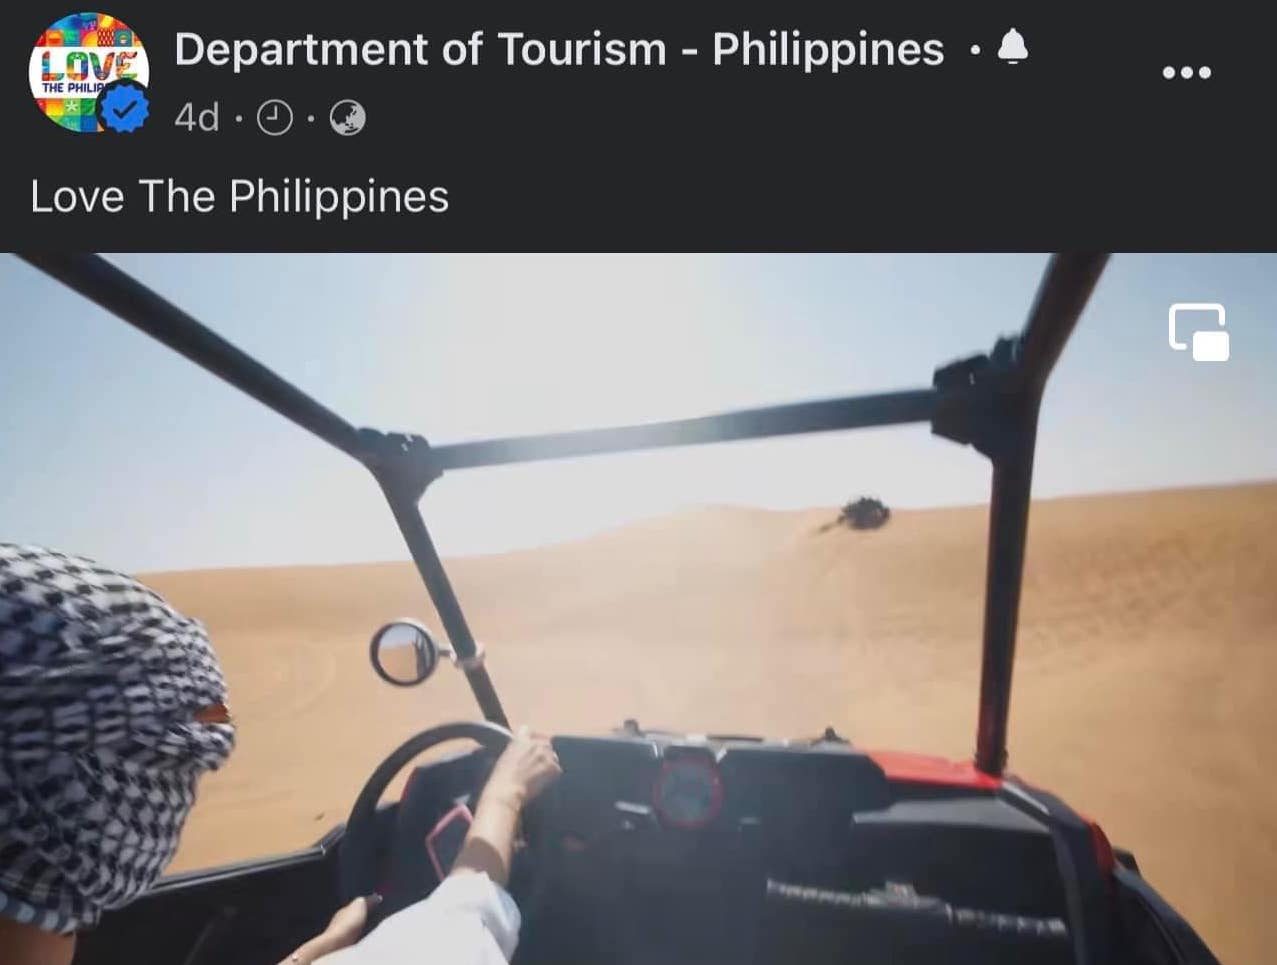 ‘Love the Philippines’ stock footage brouhaha draws lawmakers’ ire